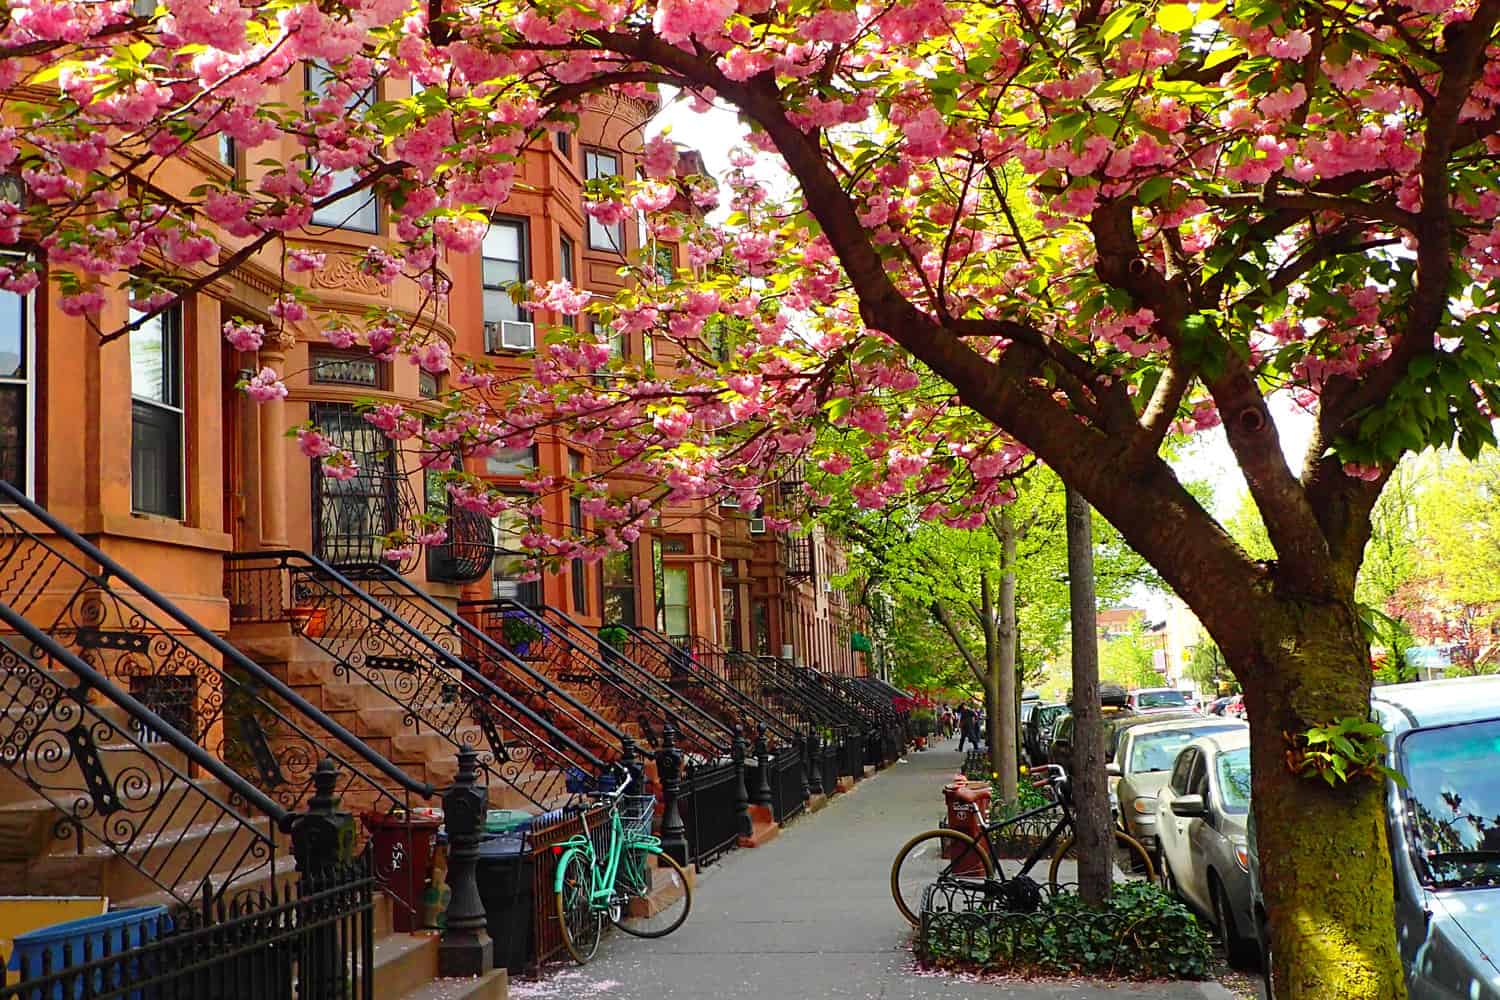 A street in Brooklyn New York during the Spring. Trees are growing, sun is shining, and it looks beautiful.